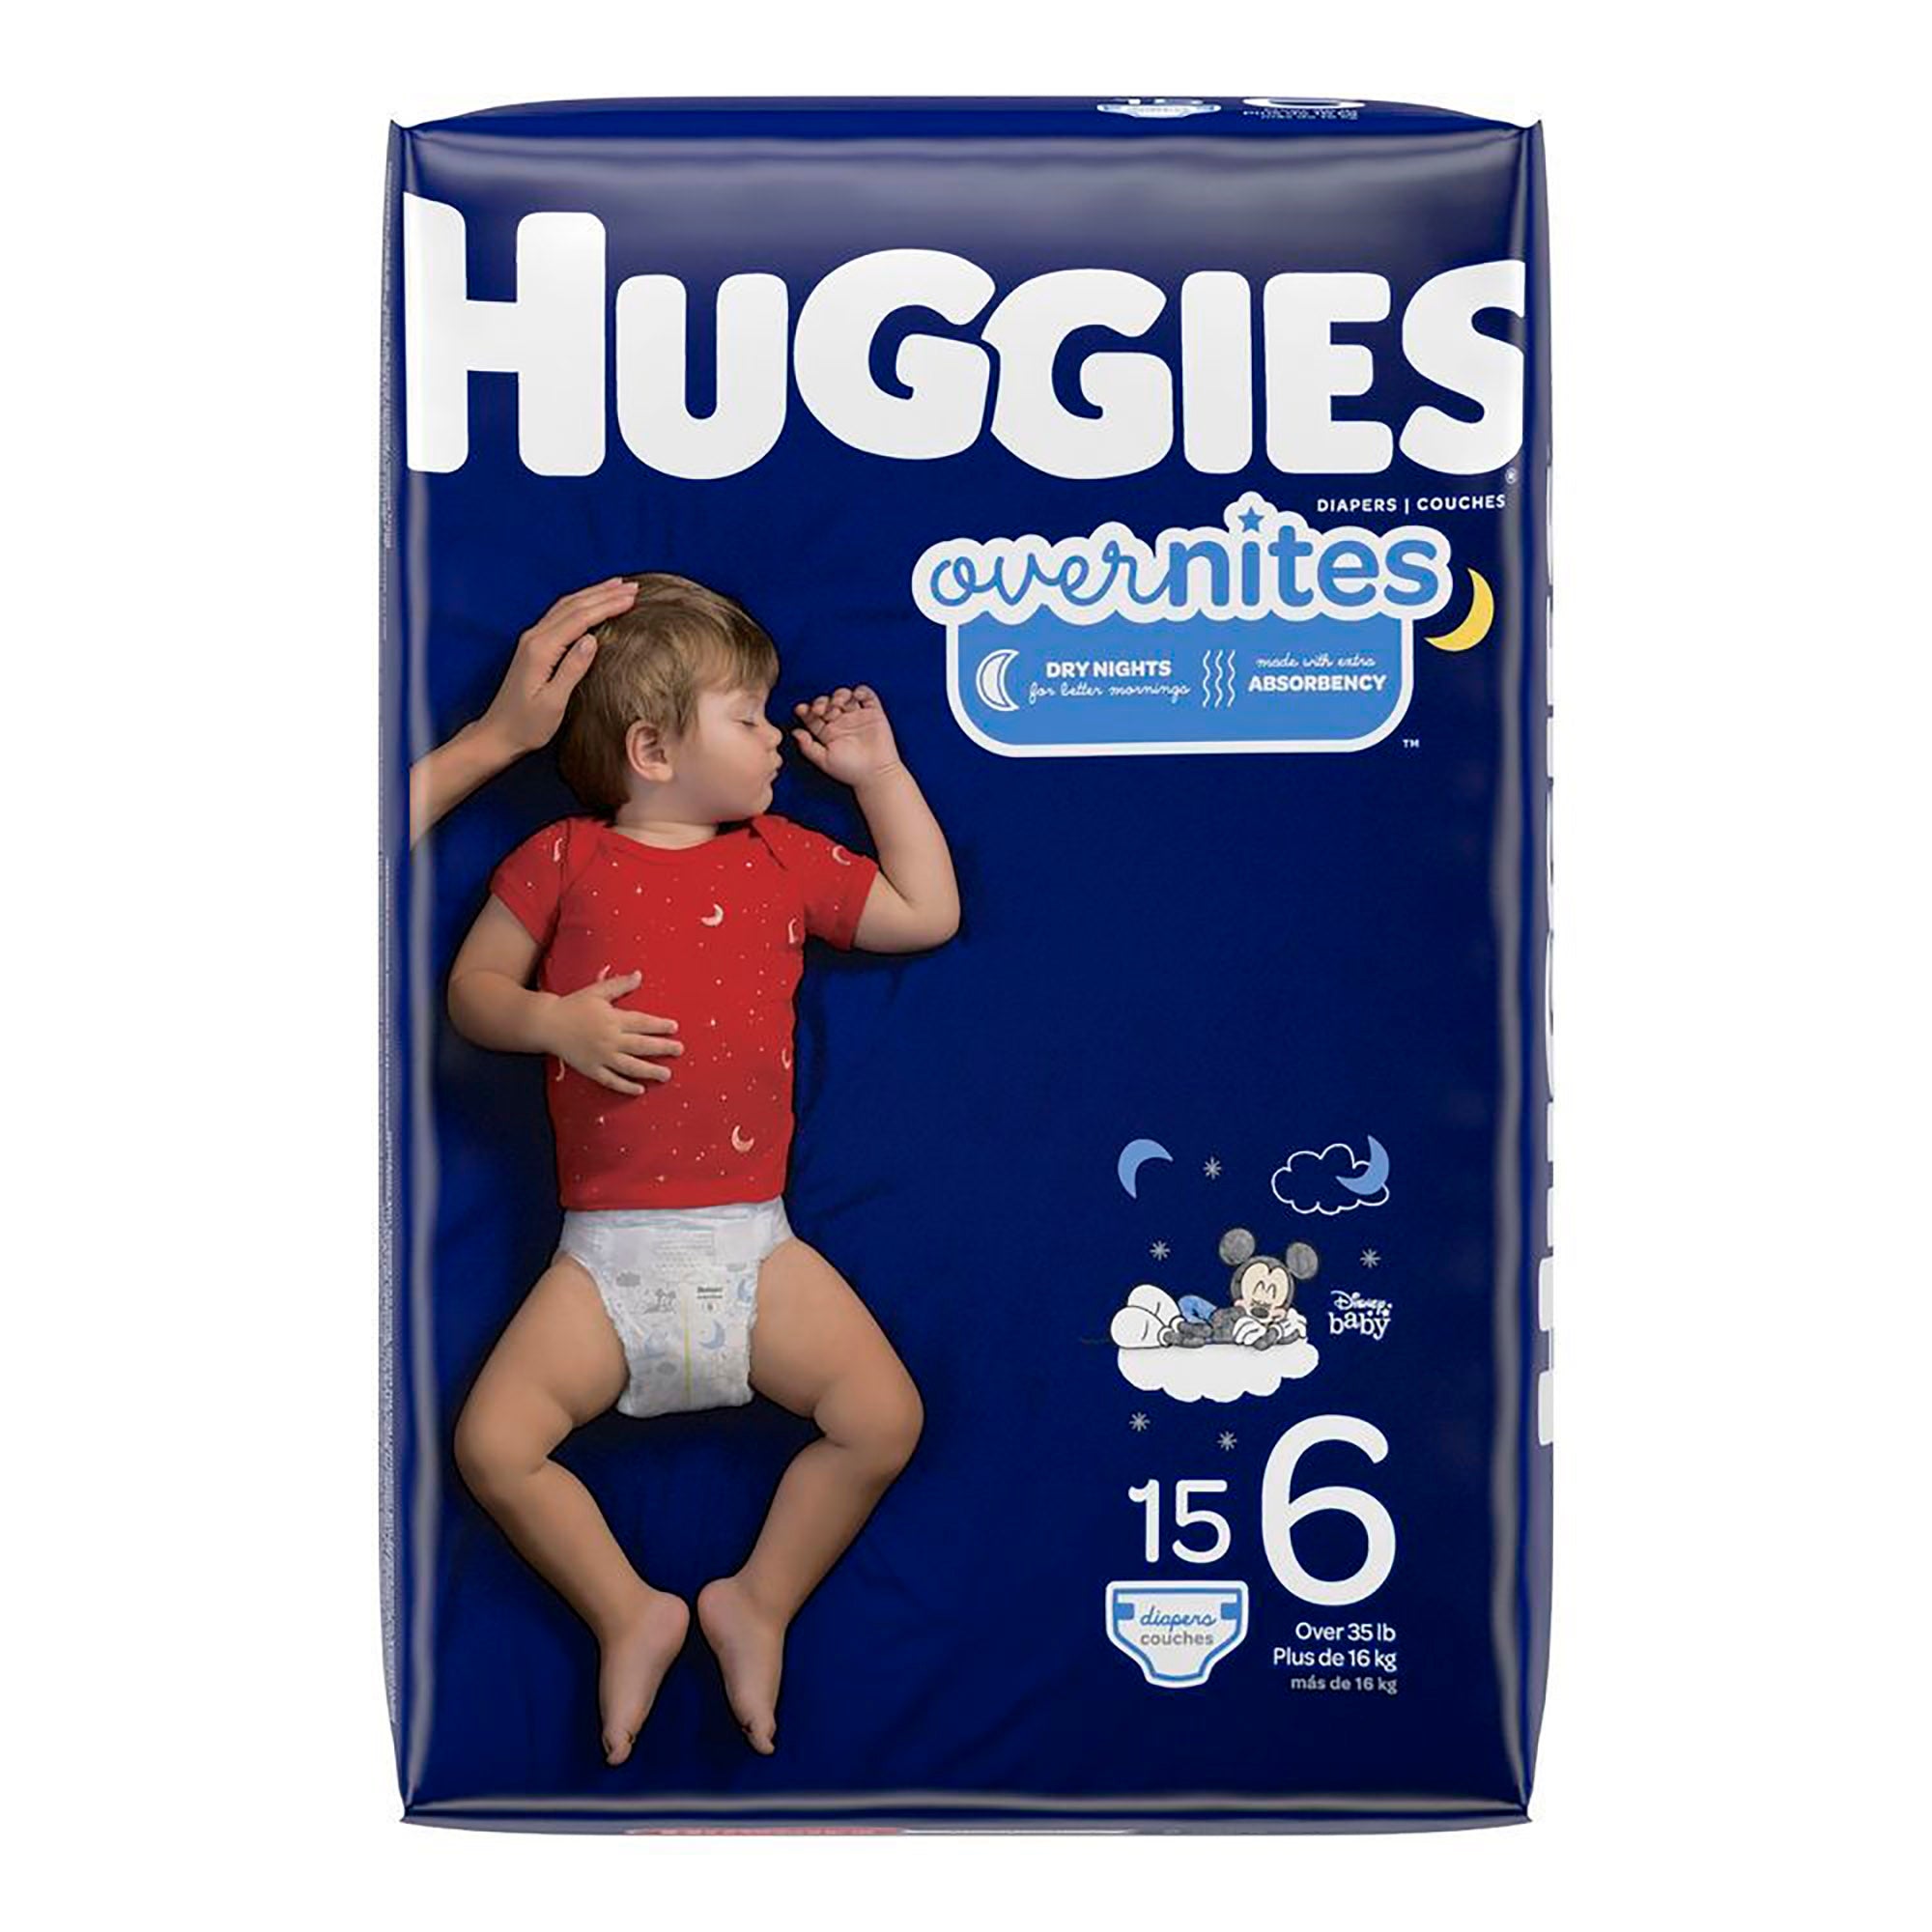 Cuties Baby Diapers in 7 sizes from Newborn to 35+ lbs - home